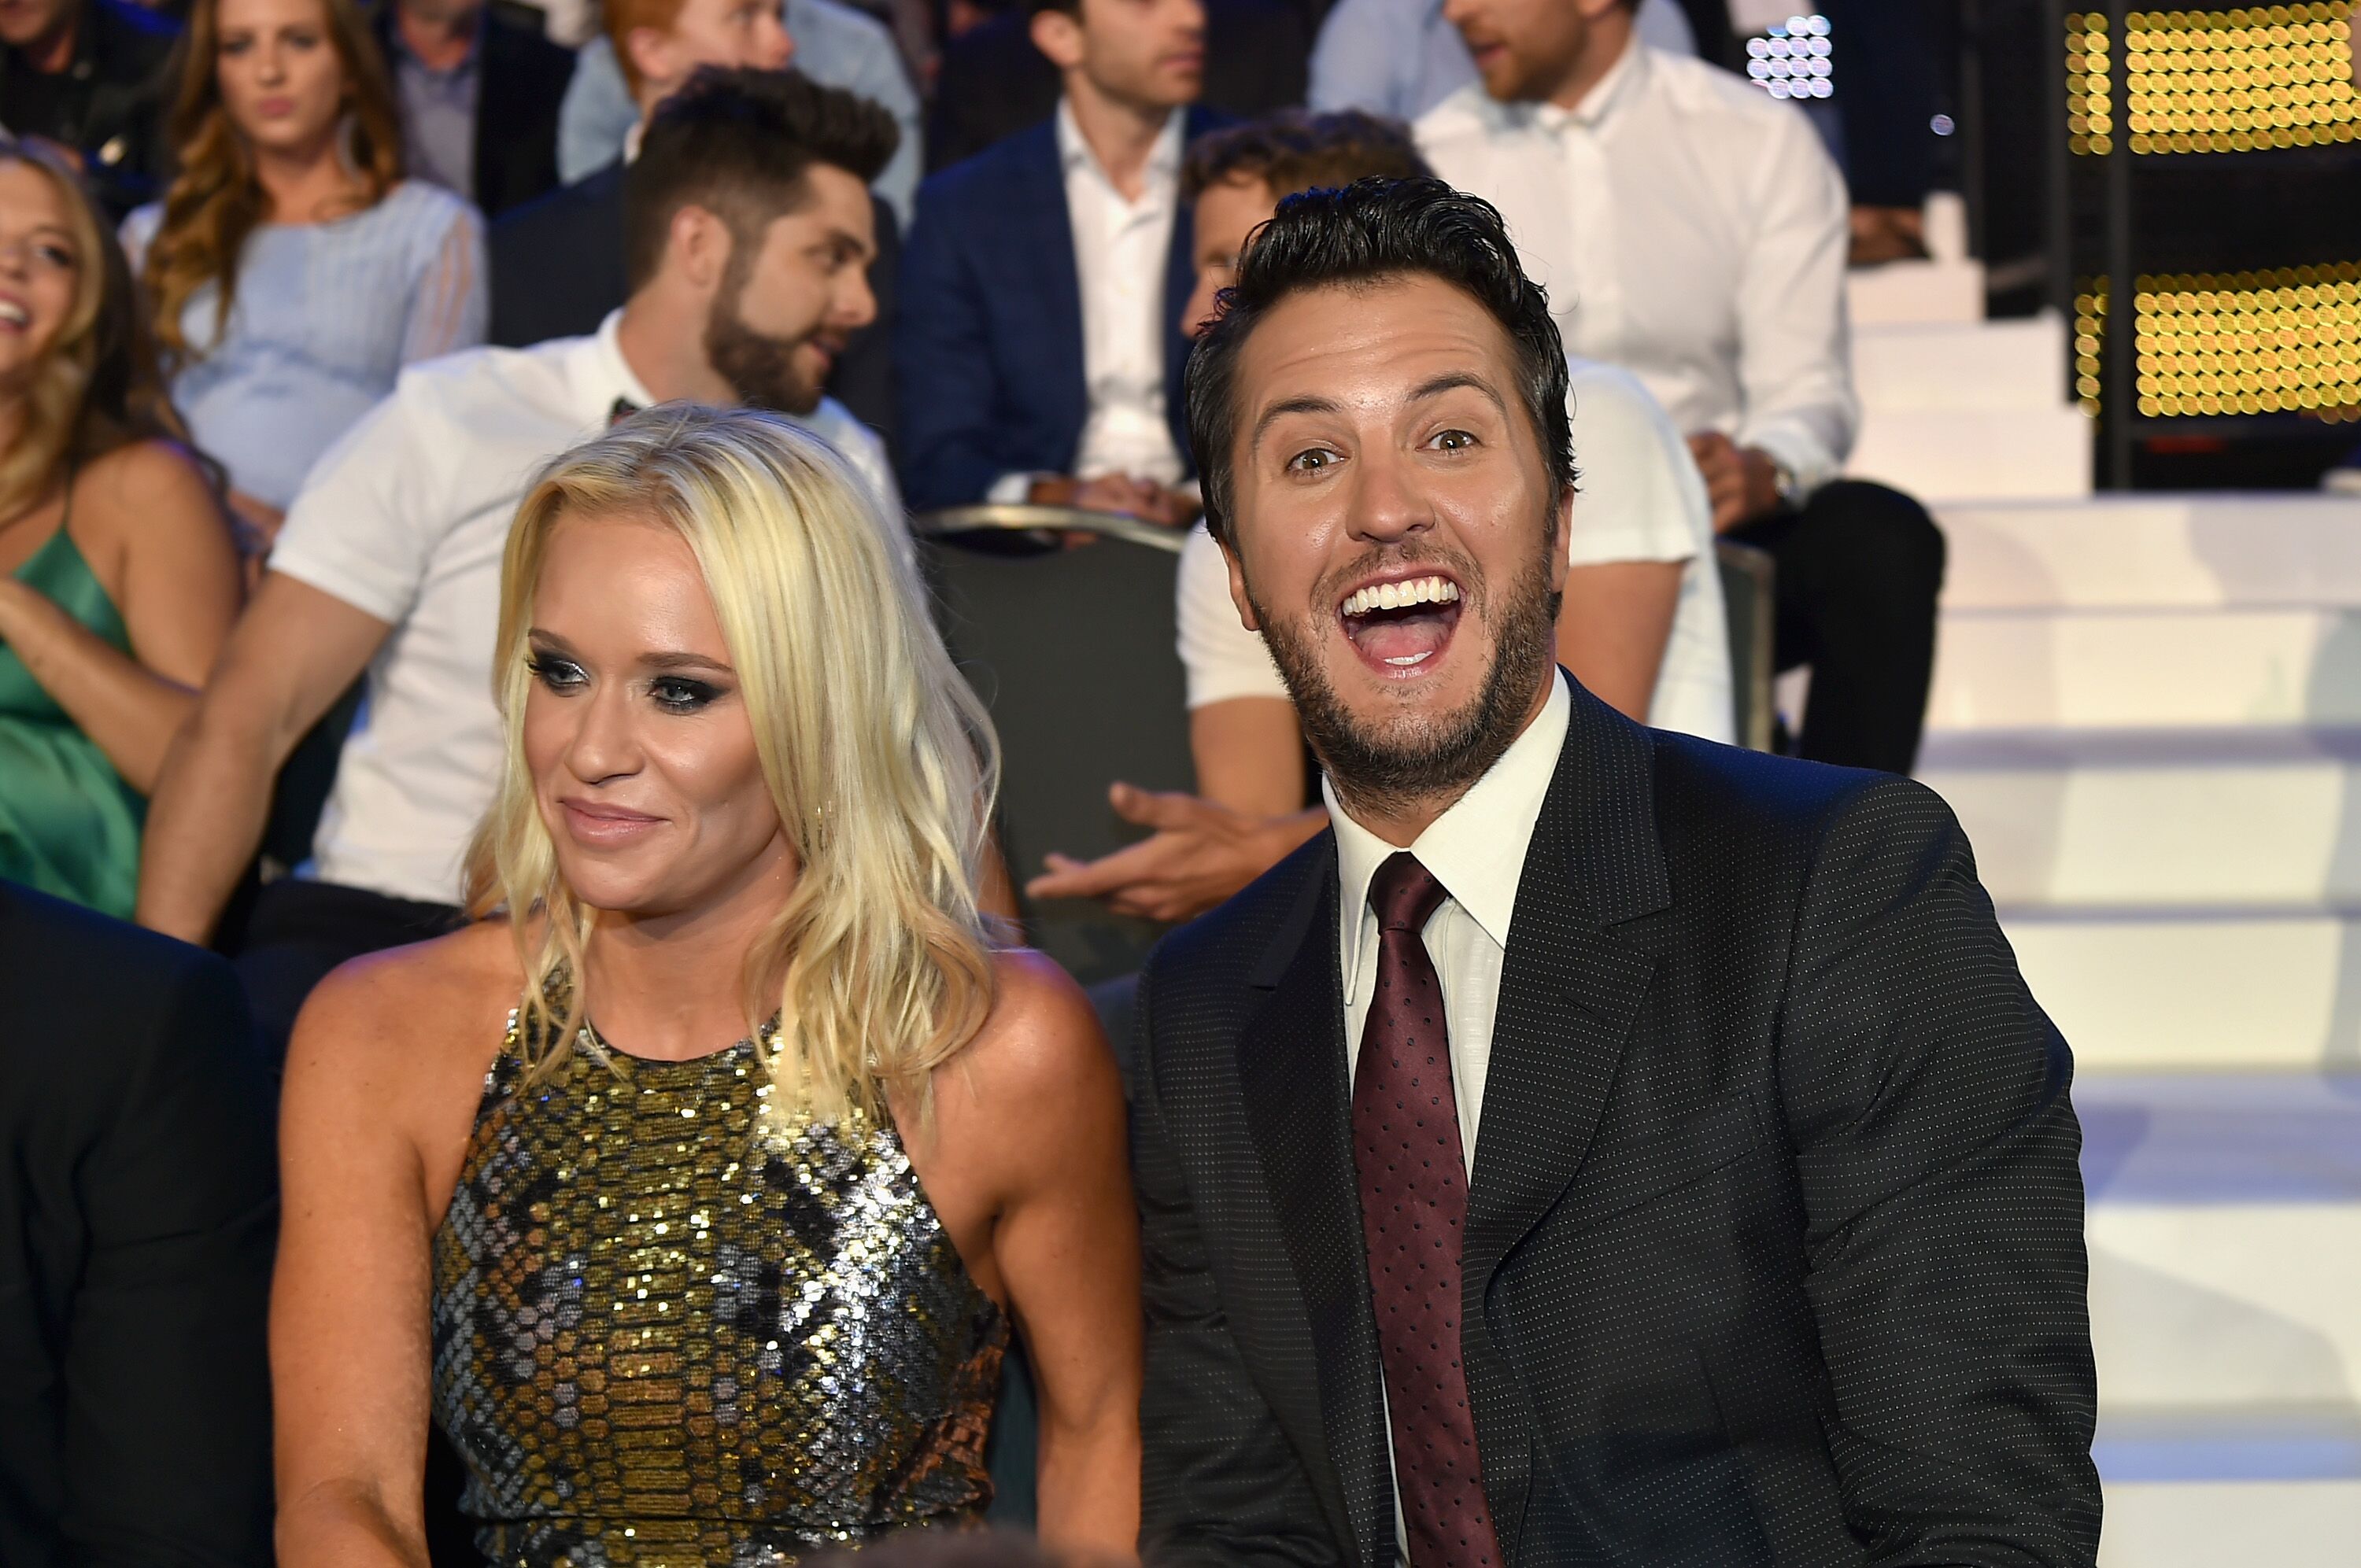 Luke Bryan (R) and Caroline Boyer (L) watch the 2017 CMT Music awards at the Music City Center | Getty Images